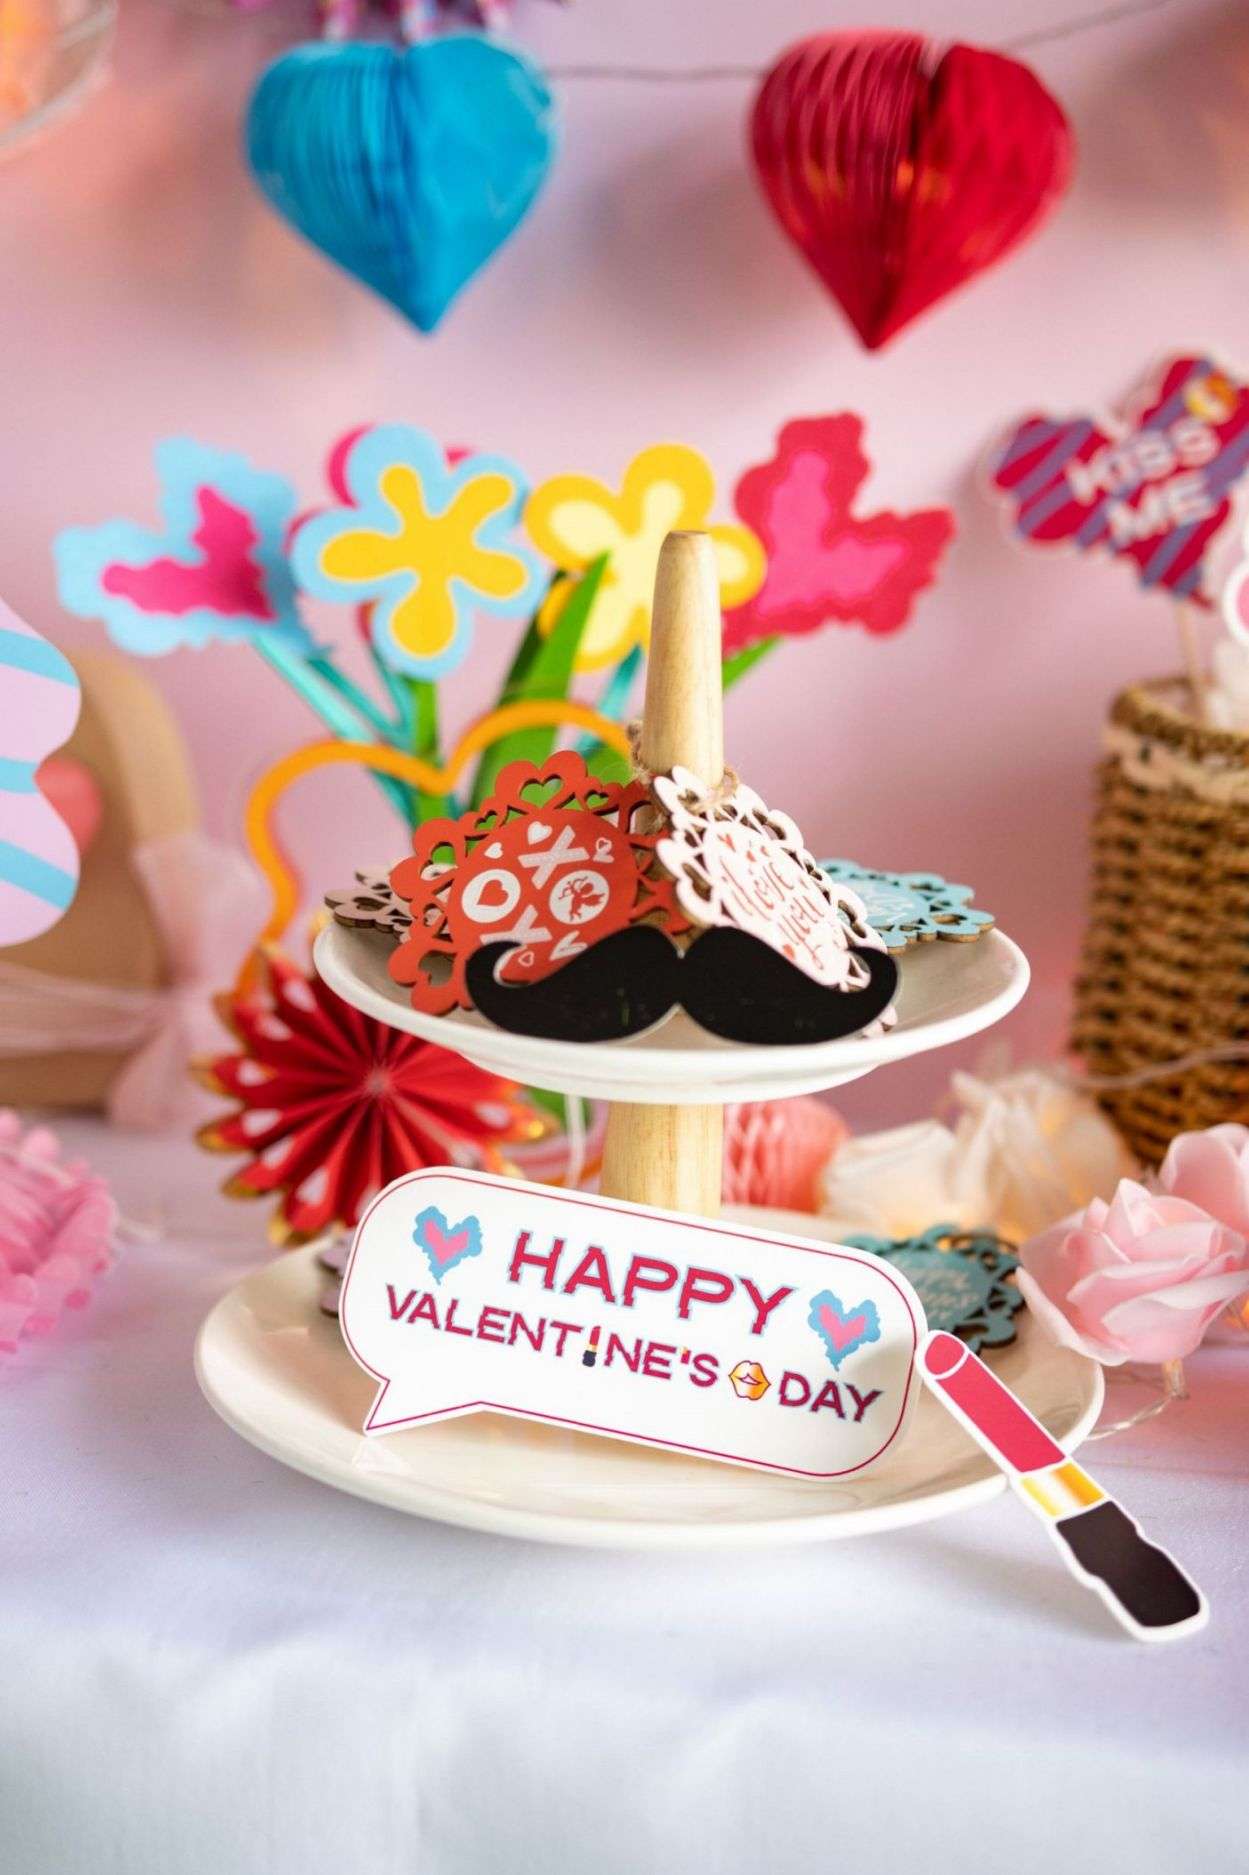 Sunbeauty Party Manufacturer Valentine's Day Decorations